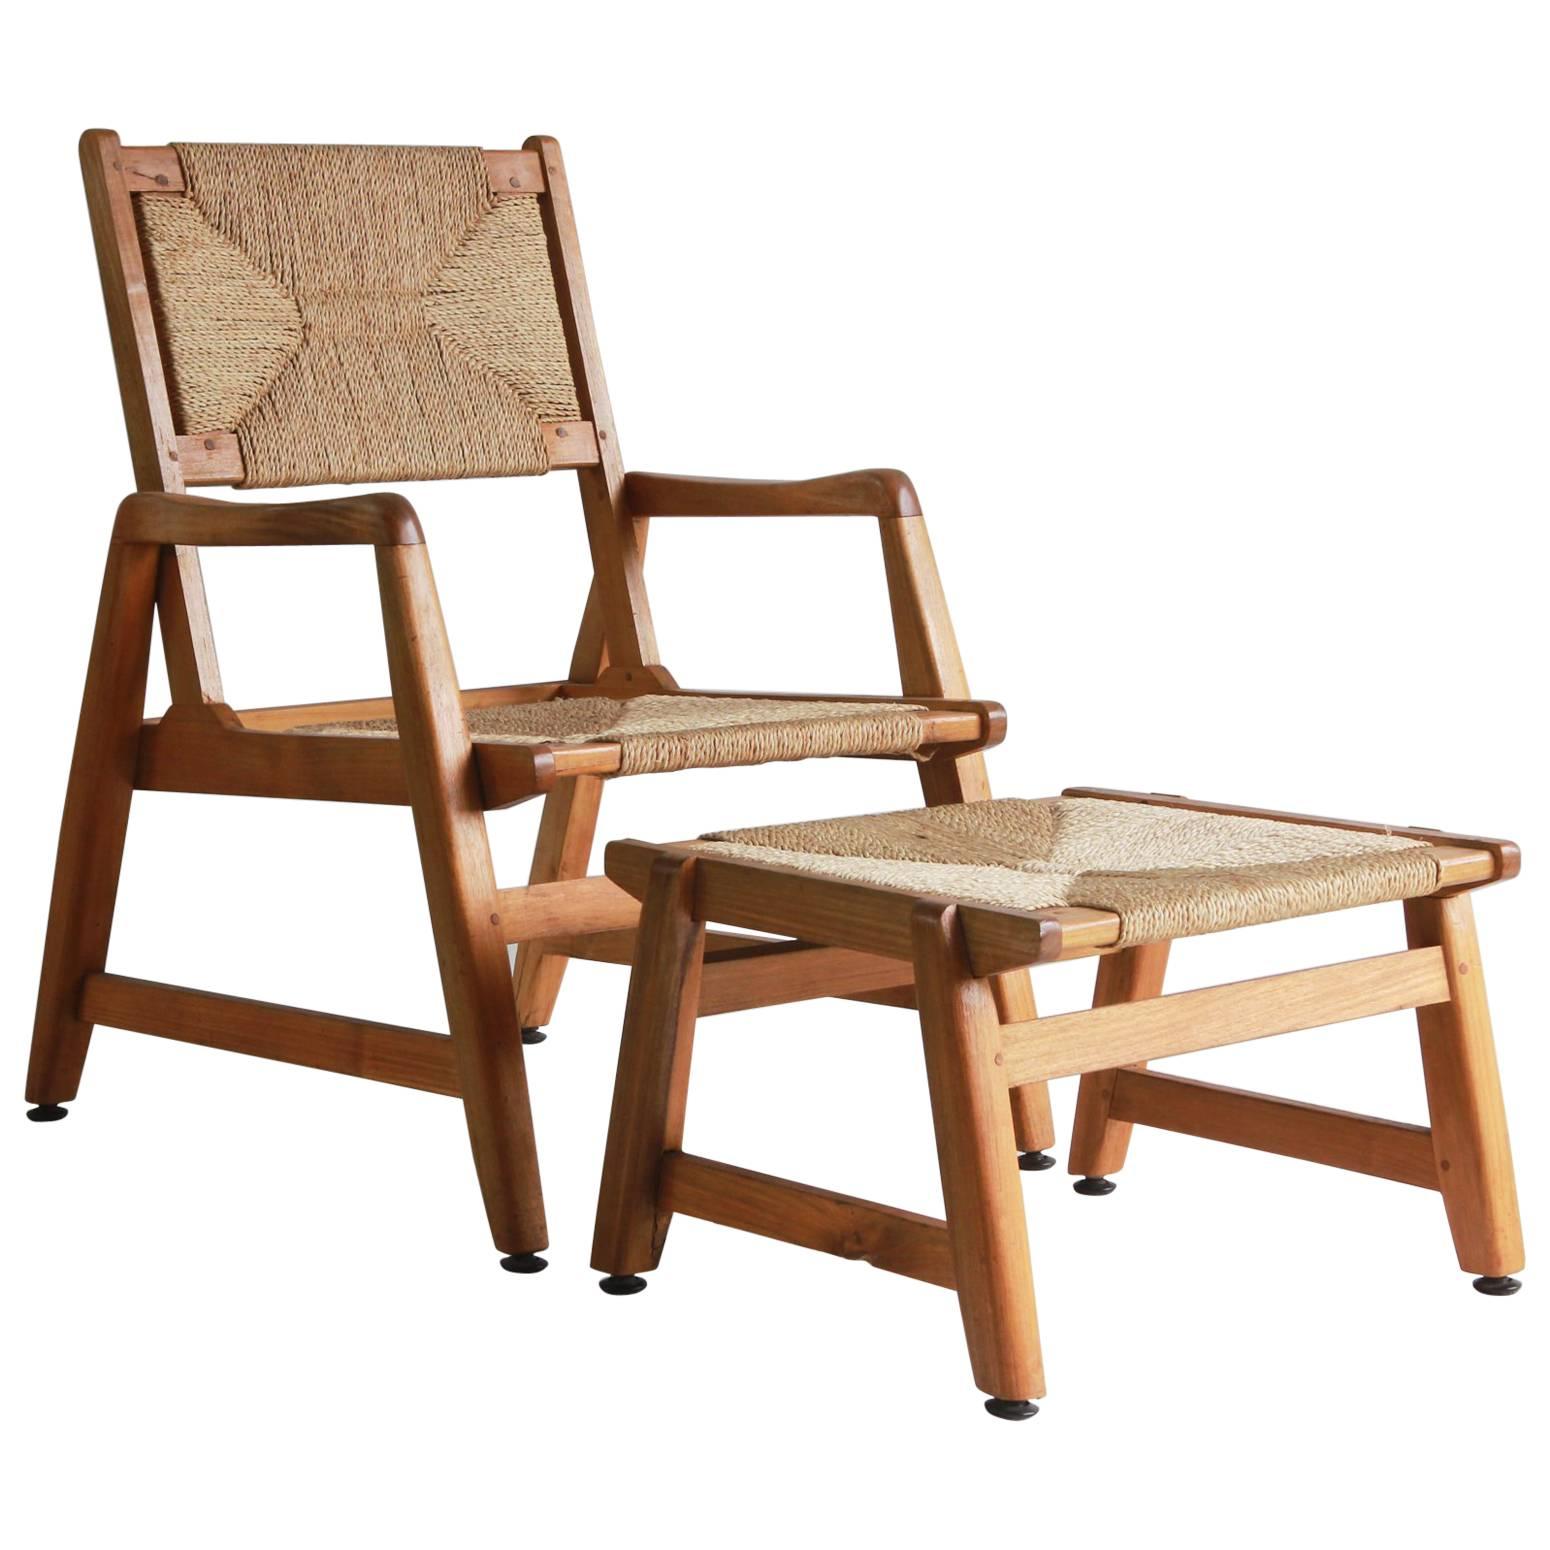 Danish Wood Framed Chair and Ottoman with Woven Rush Details